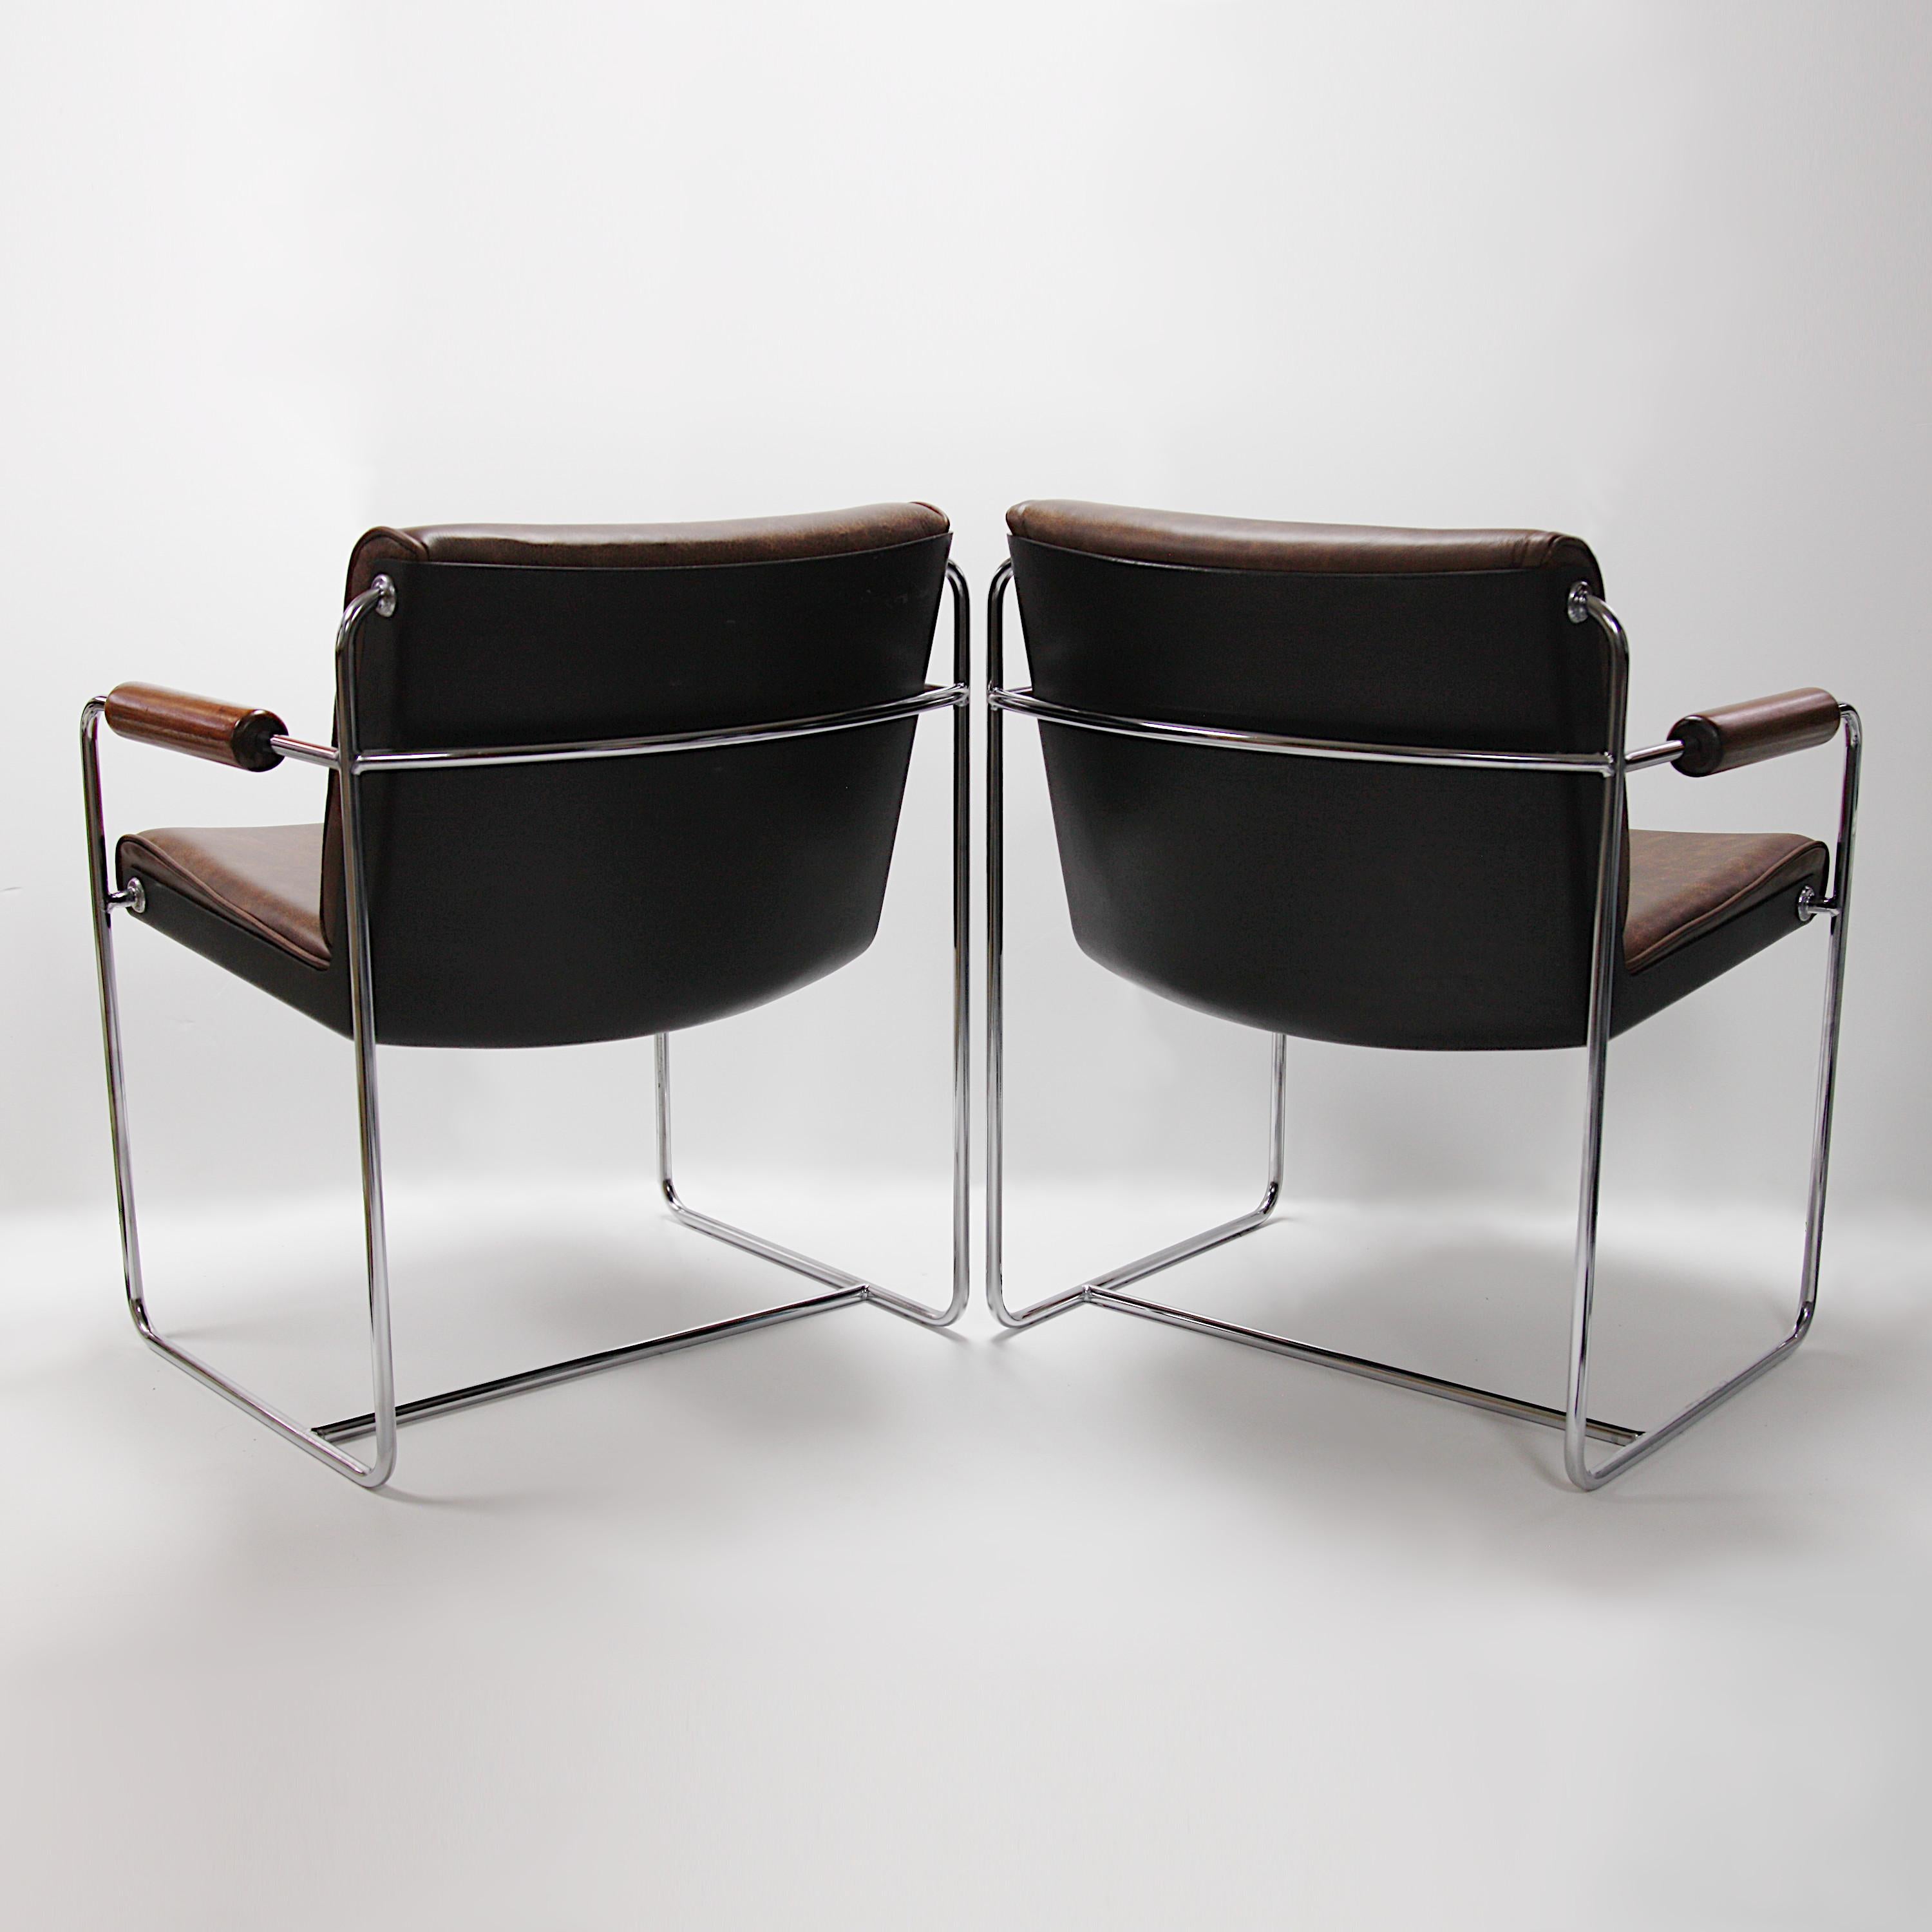 Mid-20th Century Rare Pair of Mid-Century Modern Fiberglass and Brown Leather Shell Lounge Chairs For Sale